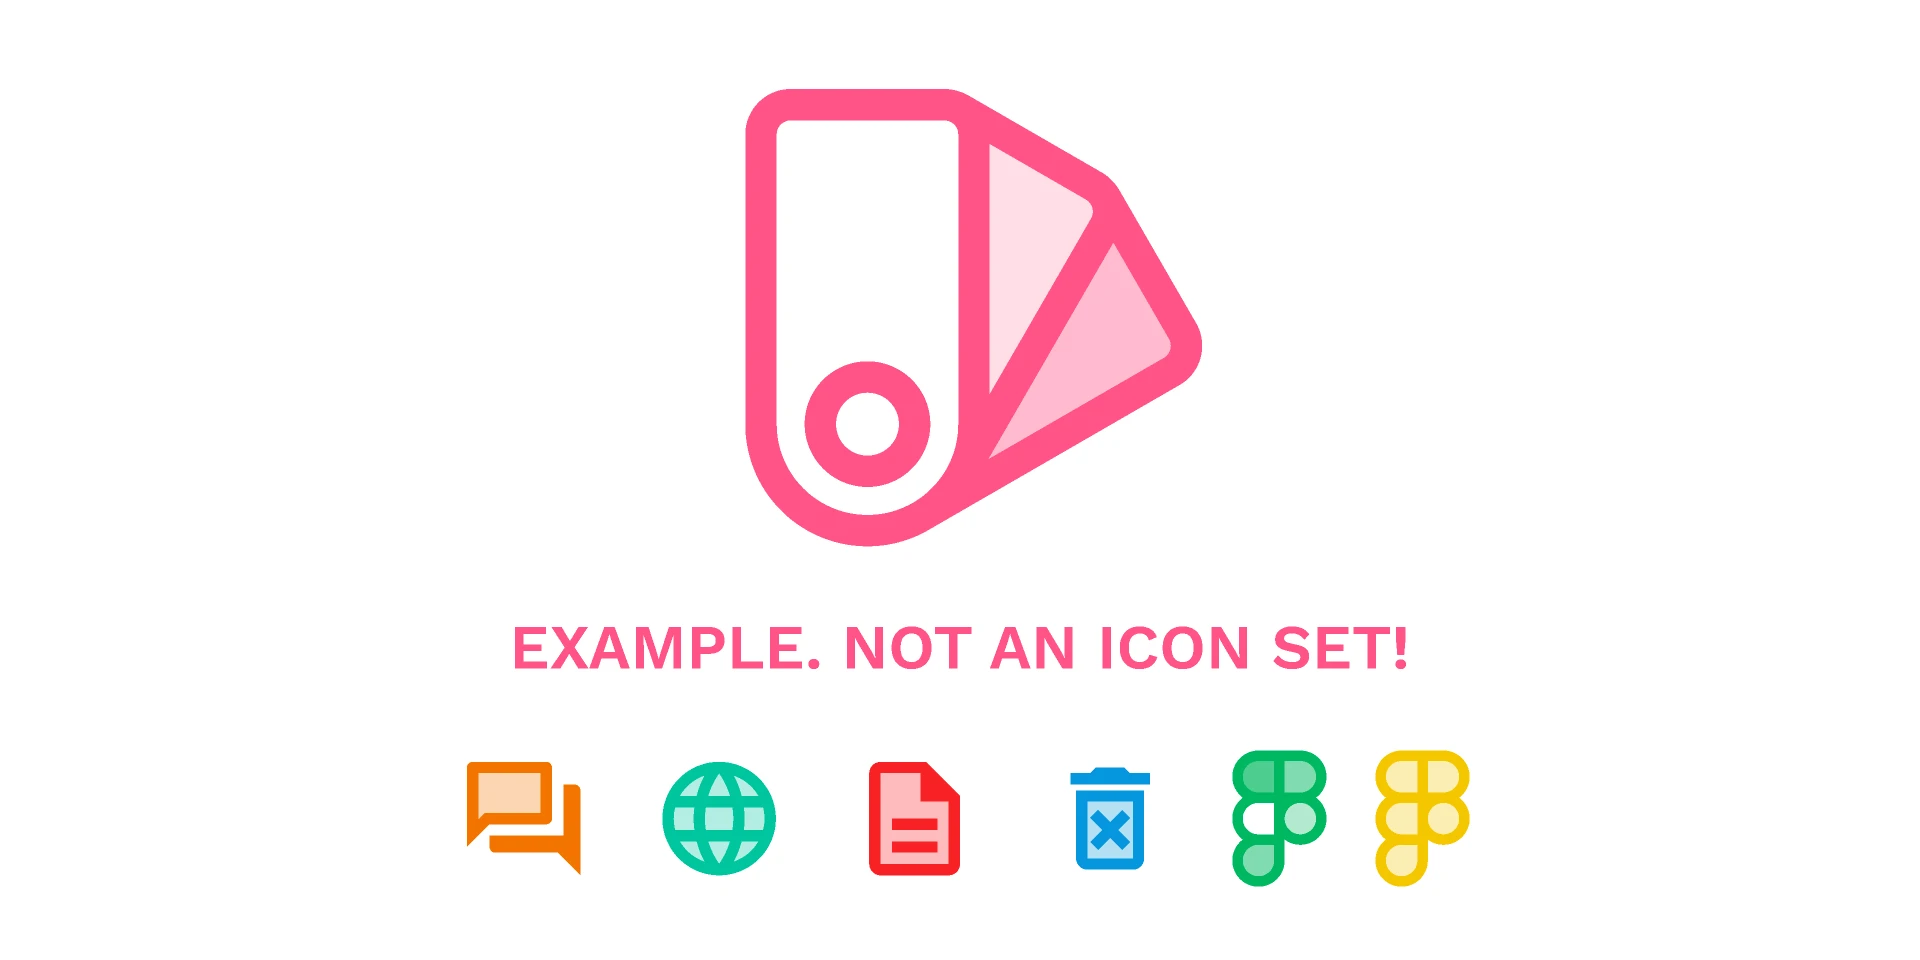 Duotone easy paint icons example for Figma and Adobe XD